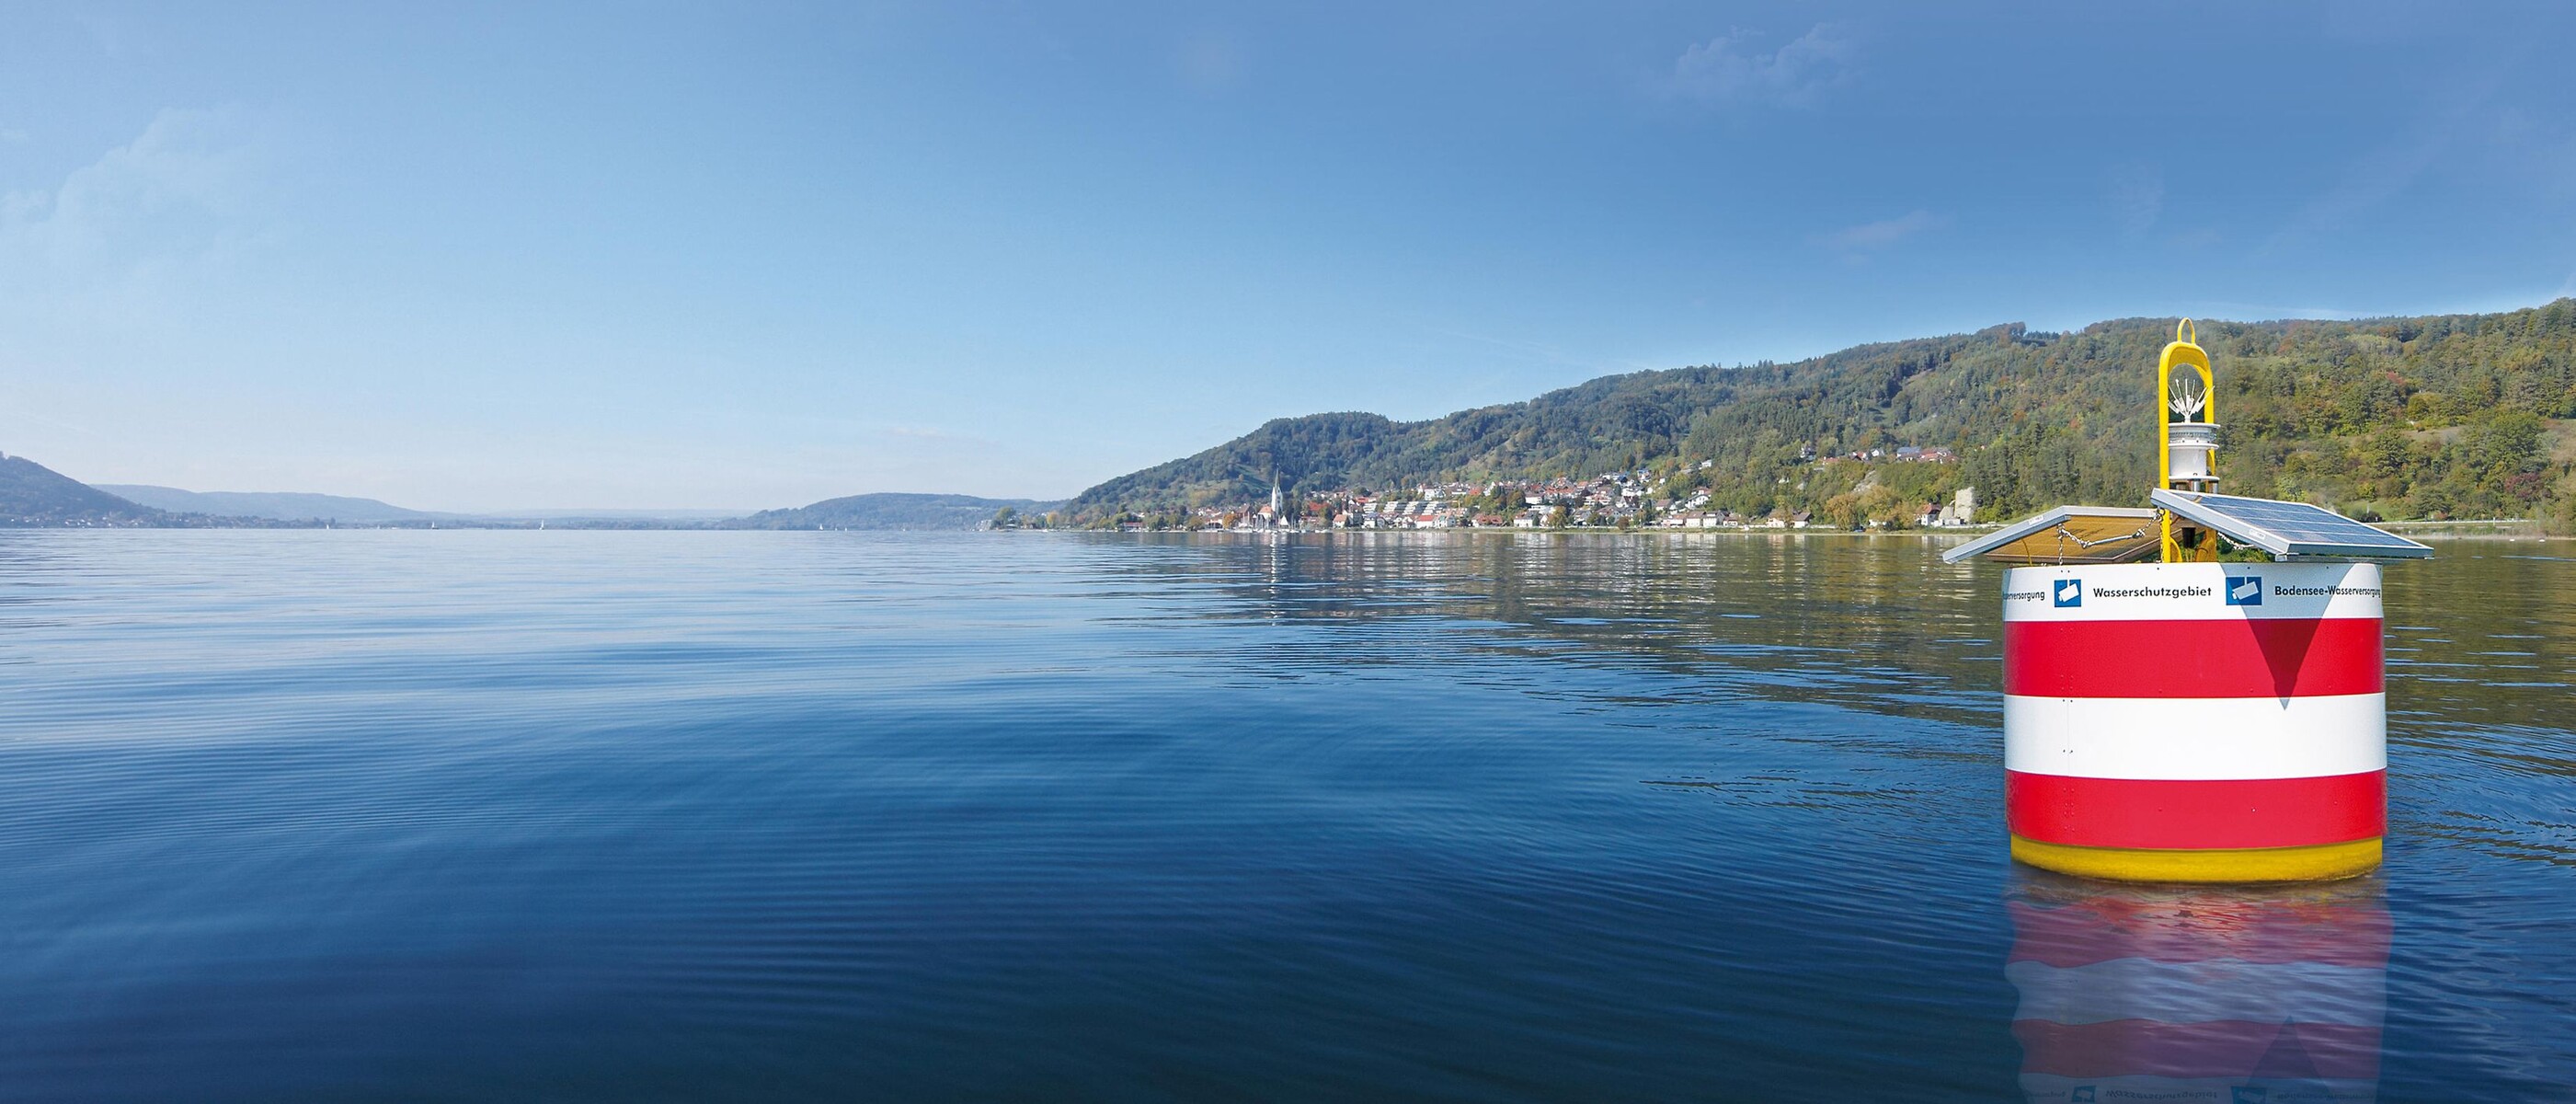 Buoys limit the water protection zone in Lake Constance